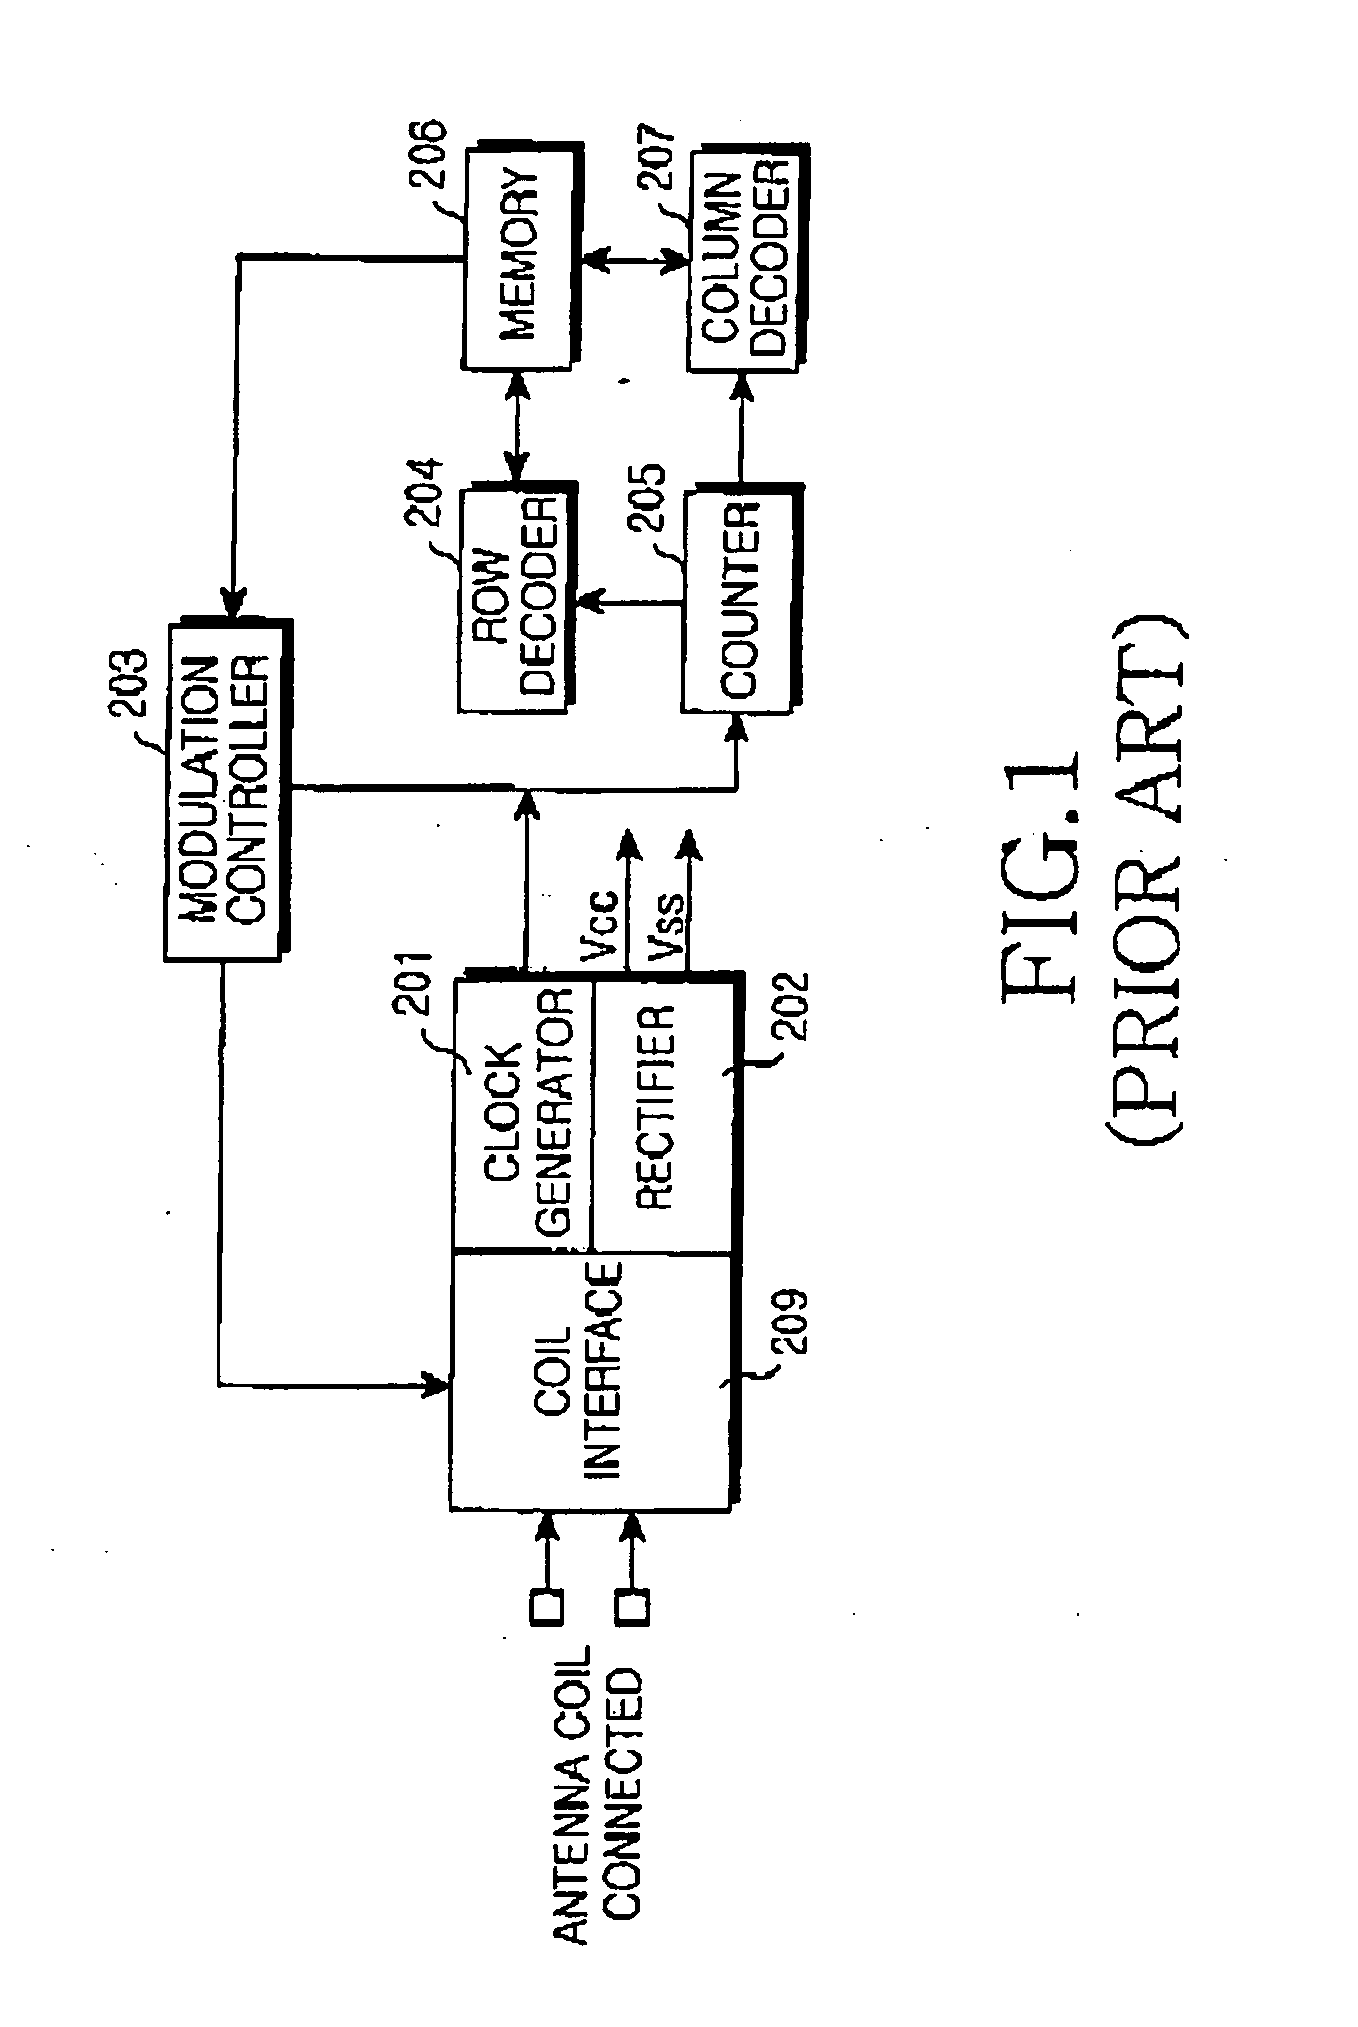 Mobile terminal circuit including an RFID tag and wireless identification method using the same